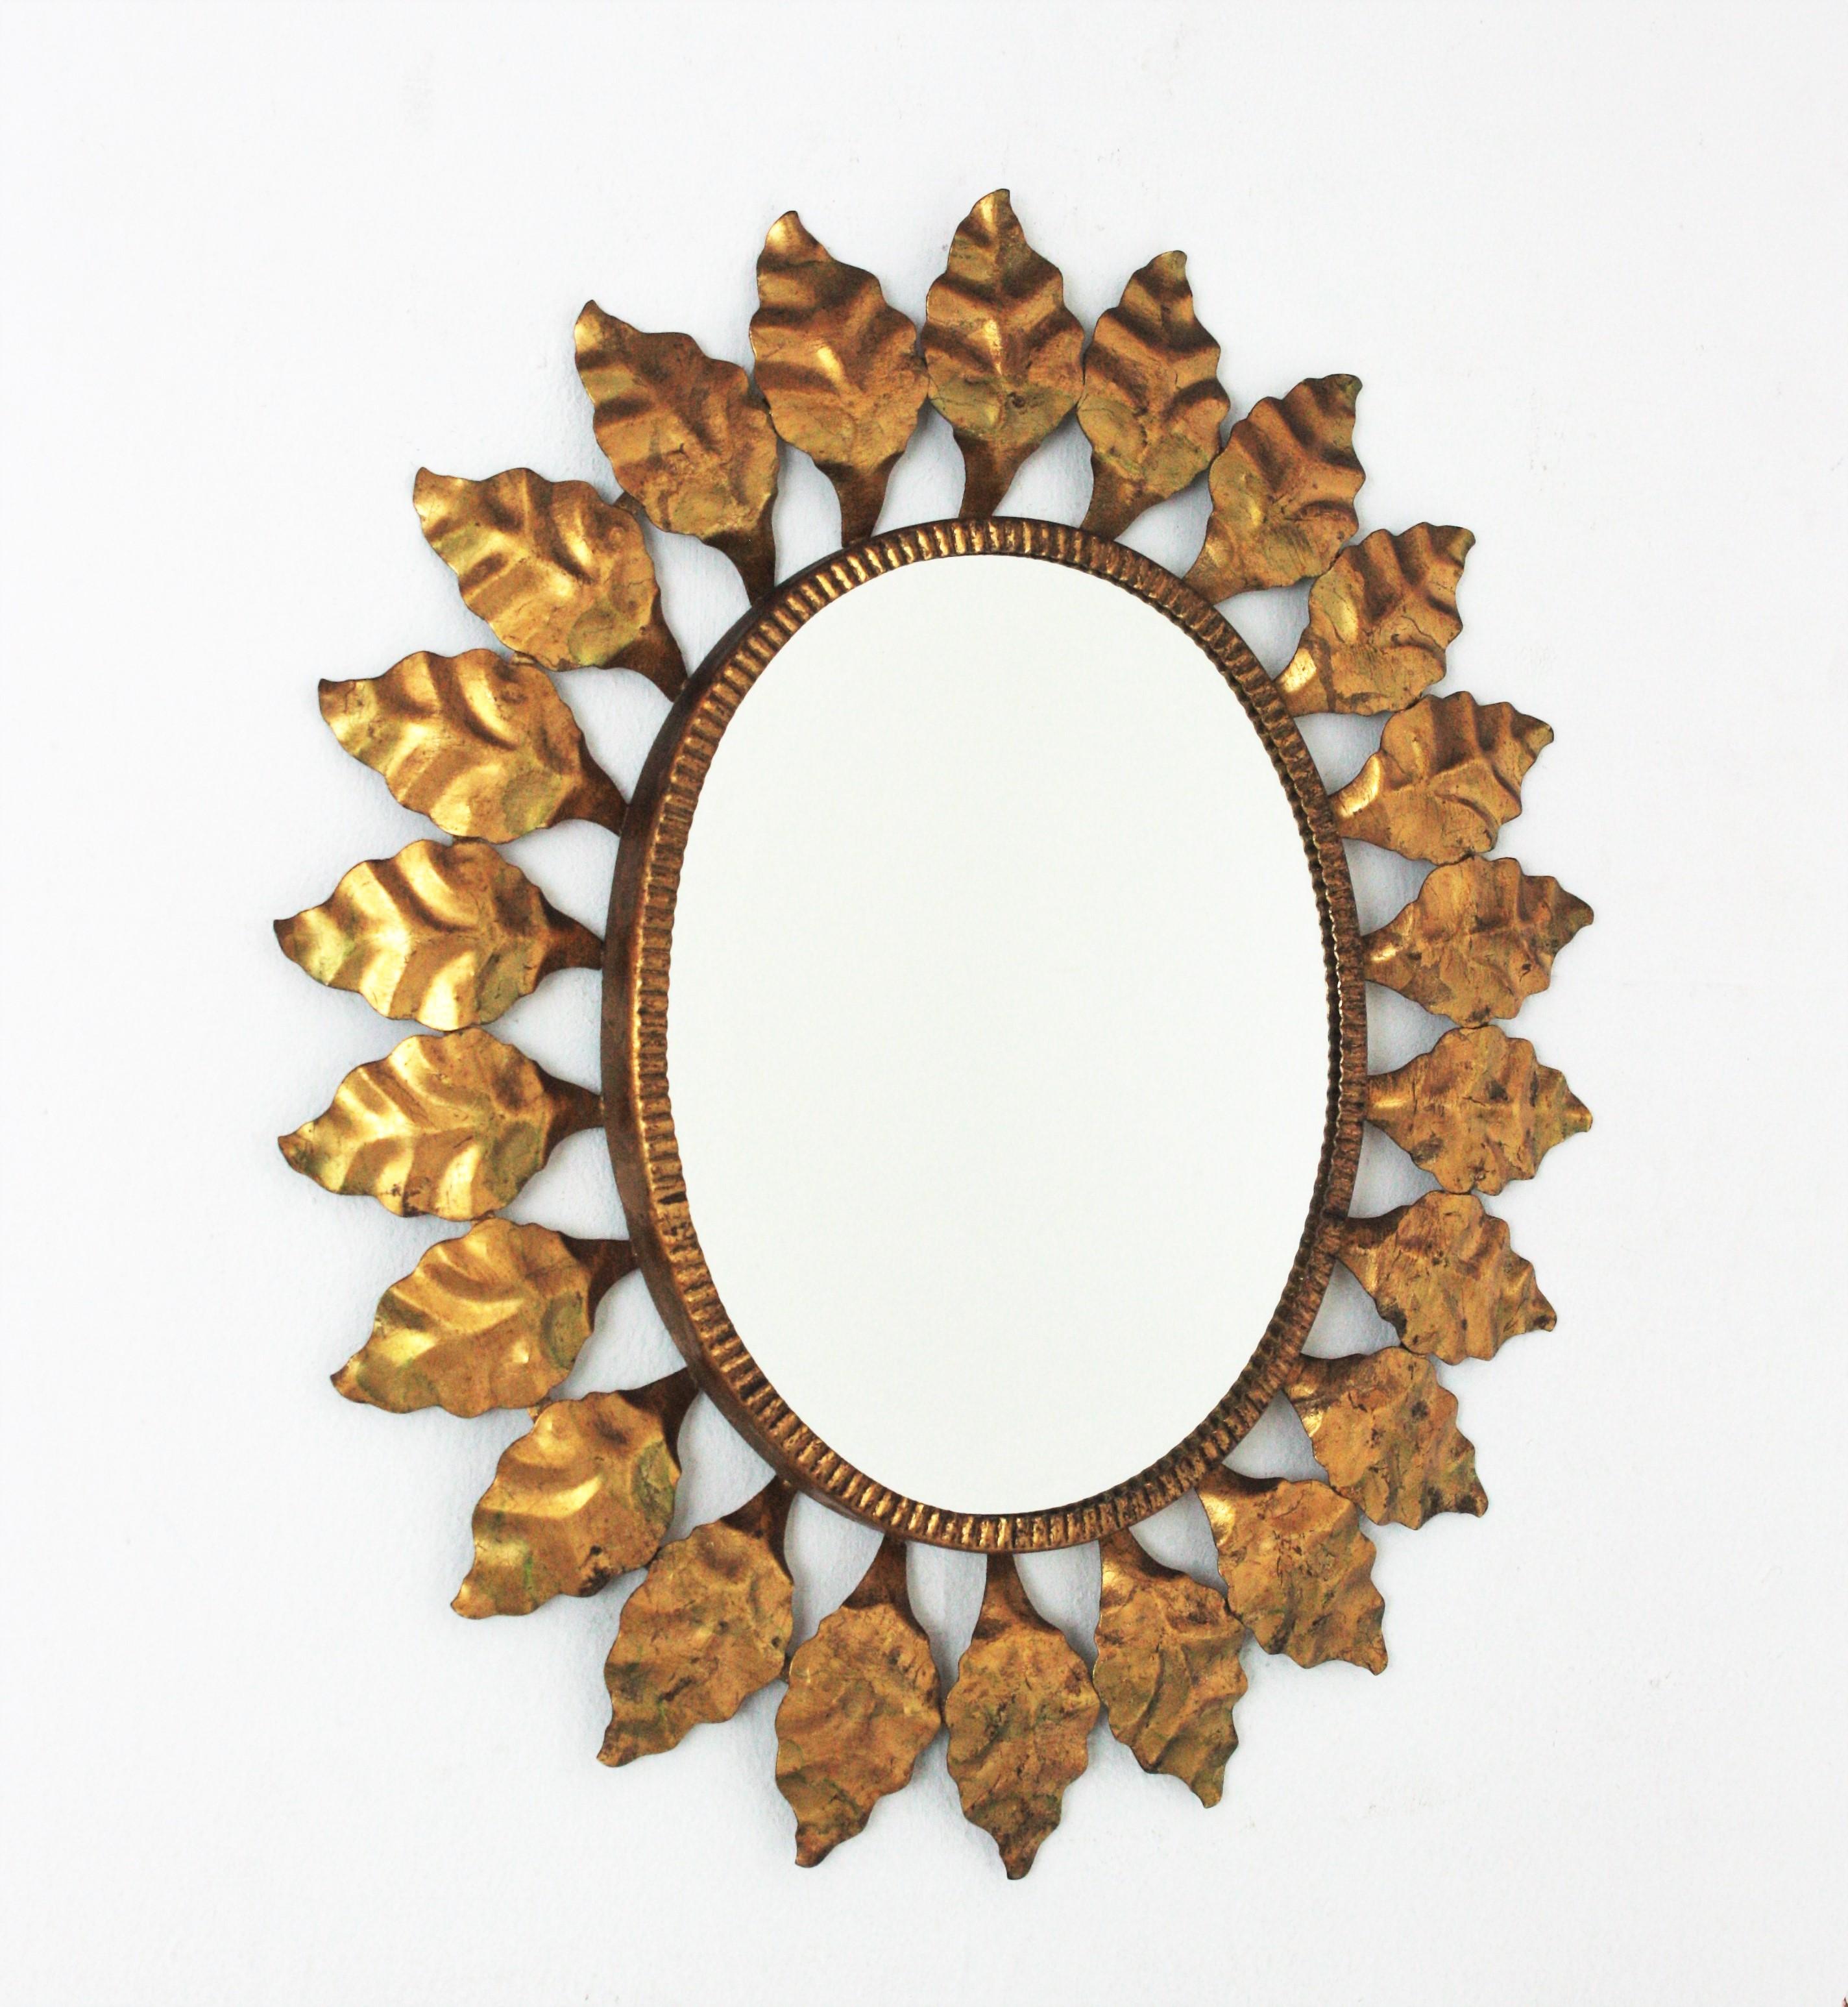 Small Mid-Century Modern wrought iron sunburst oval wall mirror with gold leaf finish, Spain, 1950s.
This highly decorative leafed sunburst gilt iron mirror has a nice color. It has terrific aged patina showing its original gold leaf gilding.
A